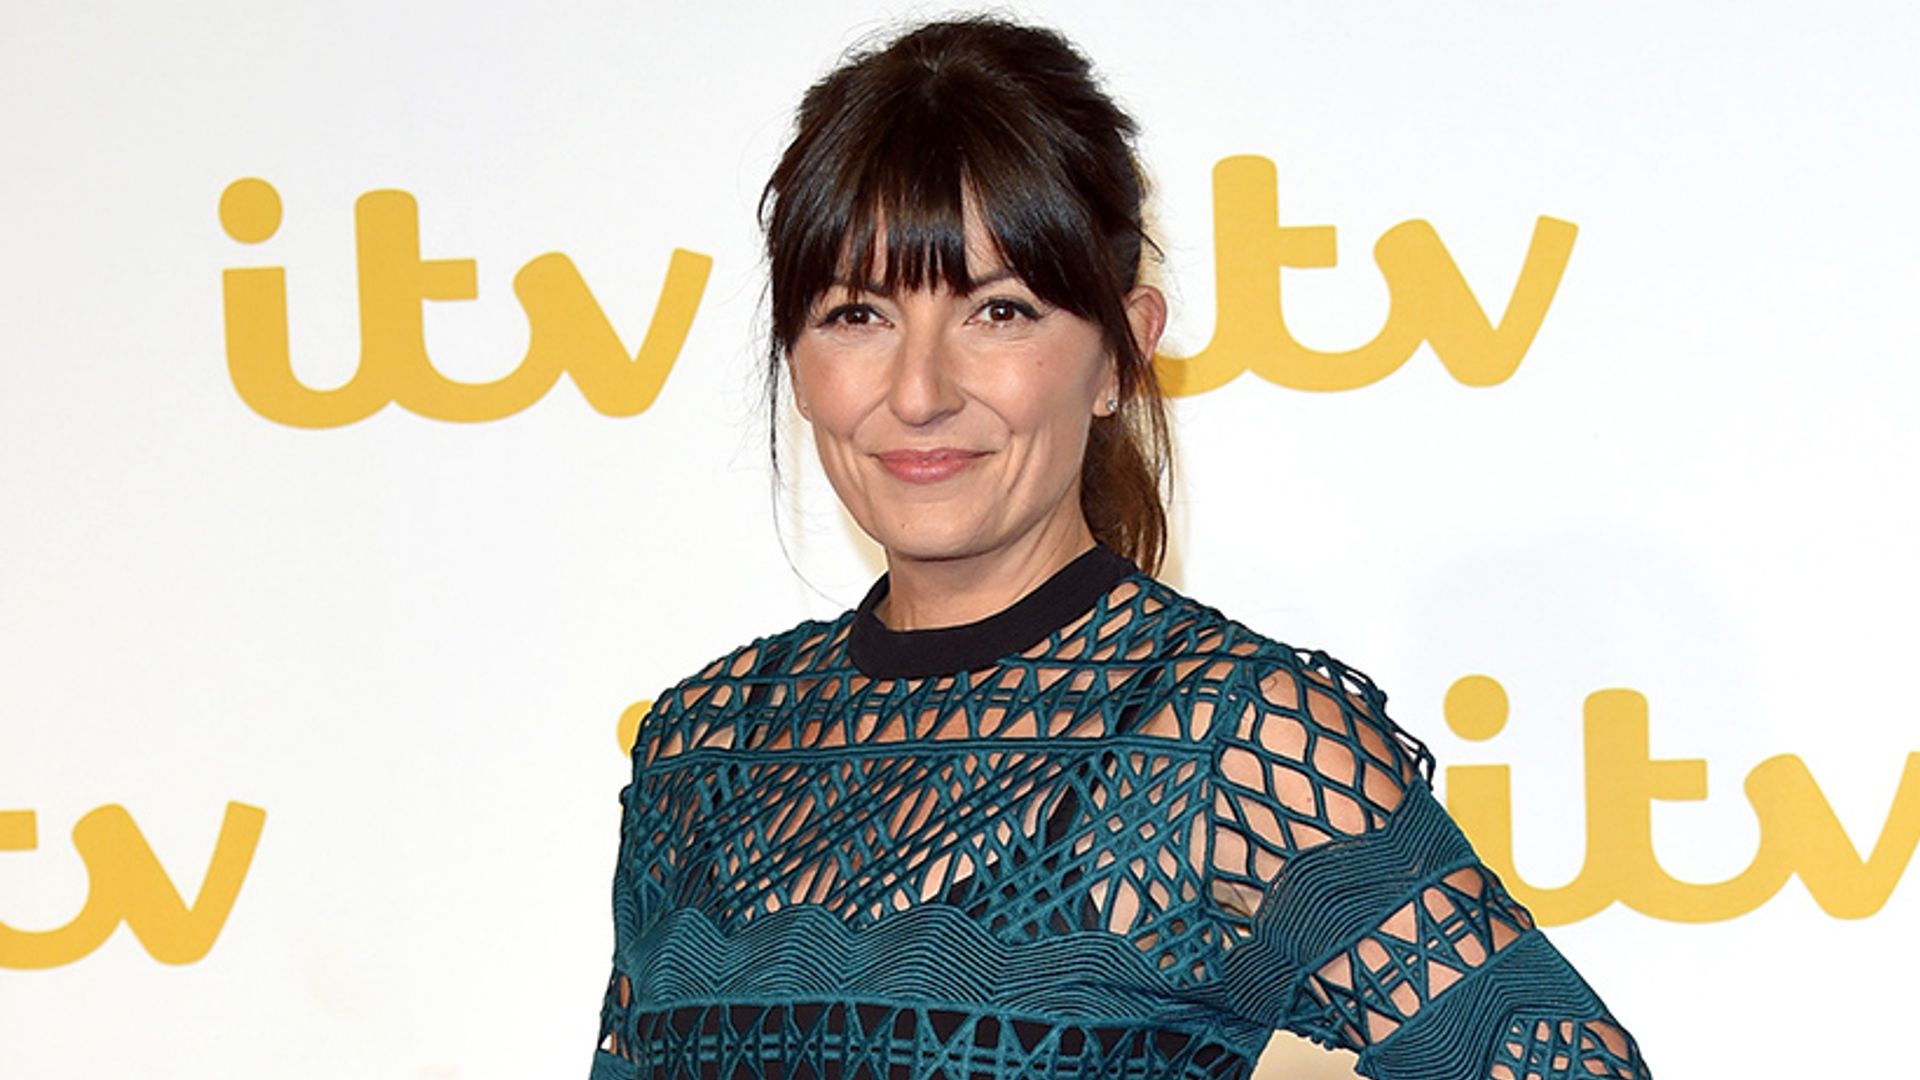 Davina McCall reveals she's been secretly messaging The Rock on Twitter